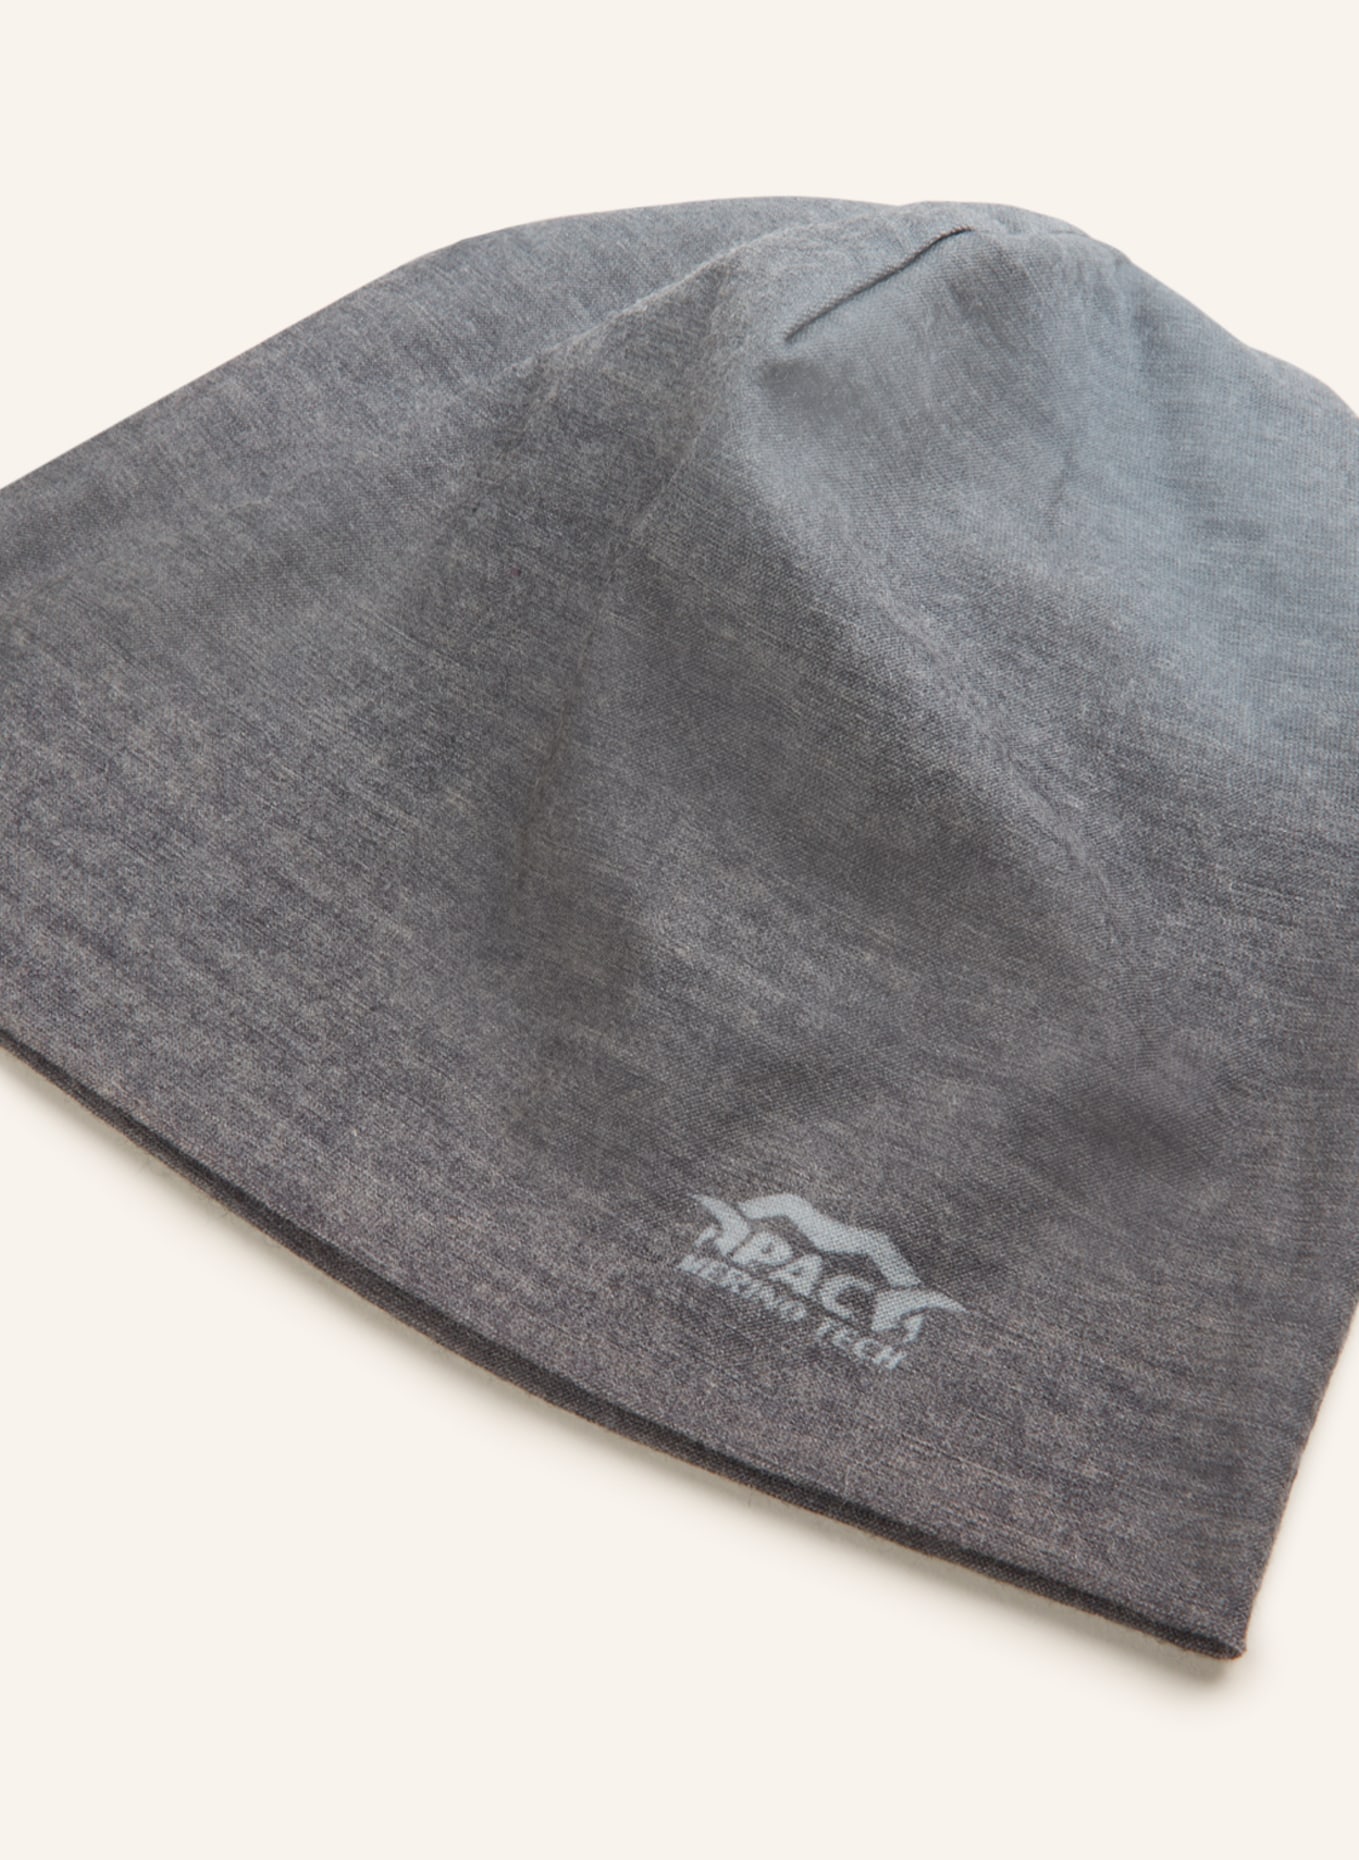 P.A.C. Multifunctional beanie with merino wool, Color: GRAY (Image 2)